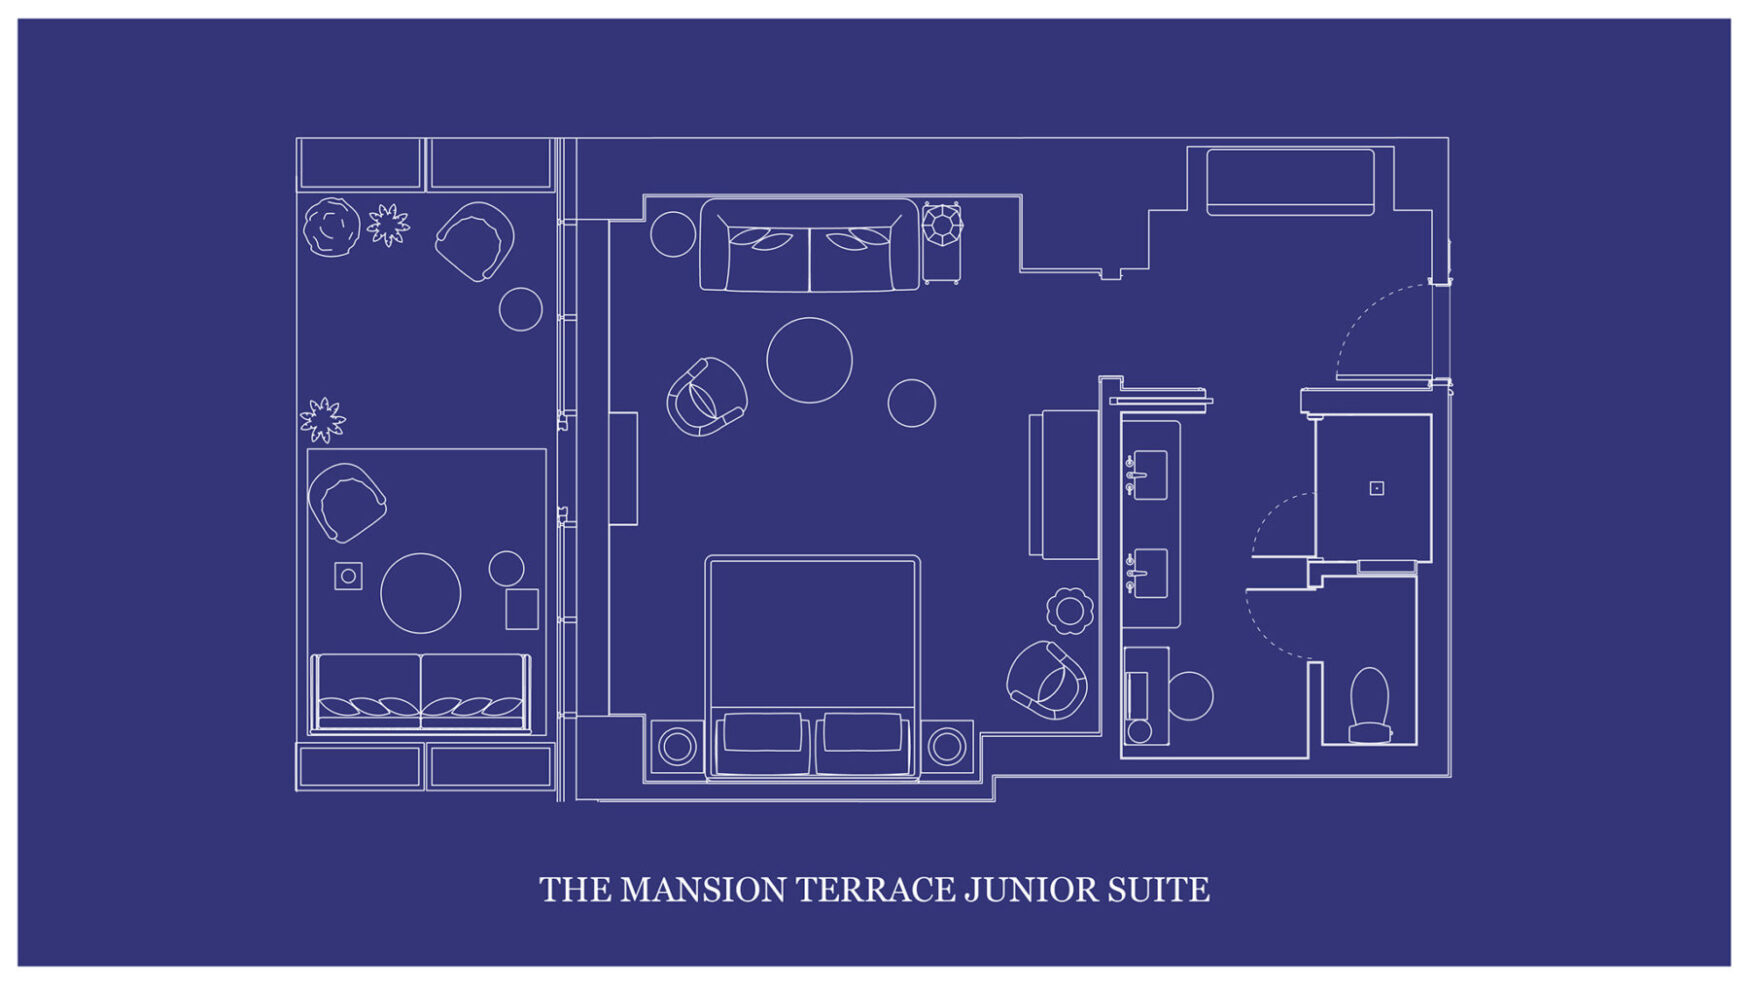 The architectural layout of "THE MANSION TERRACE JUNIOR SUITE" is depicted on a blueprint map.